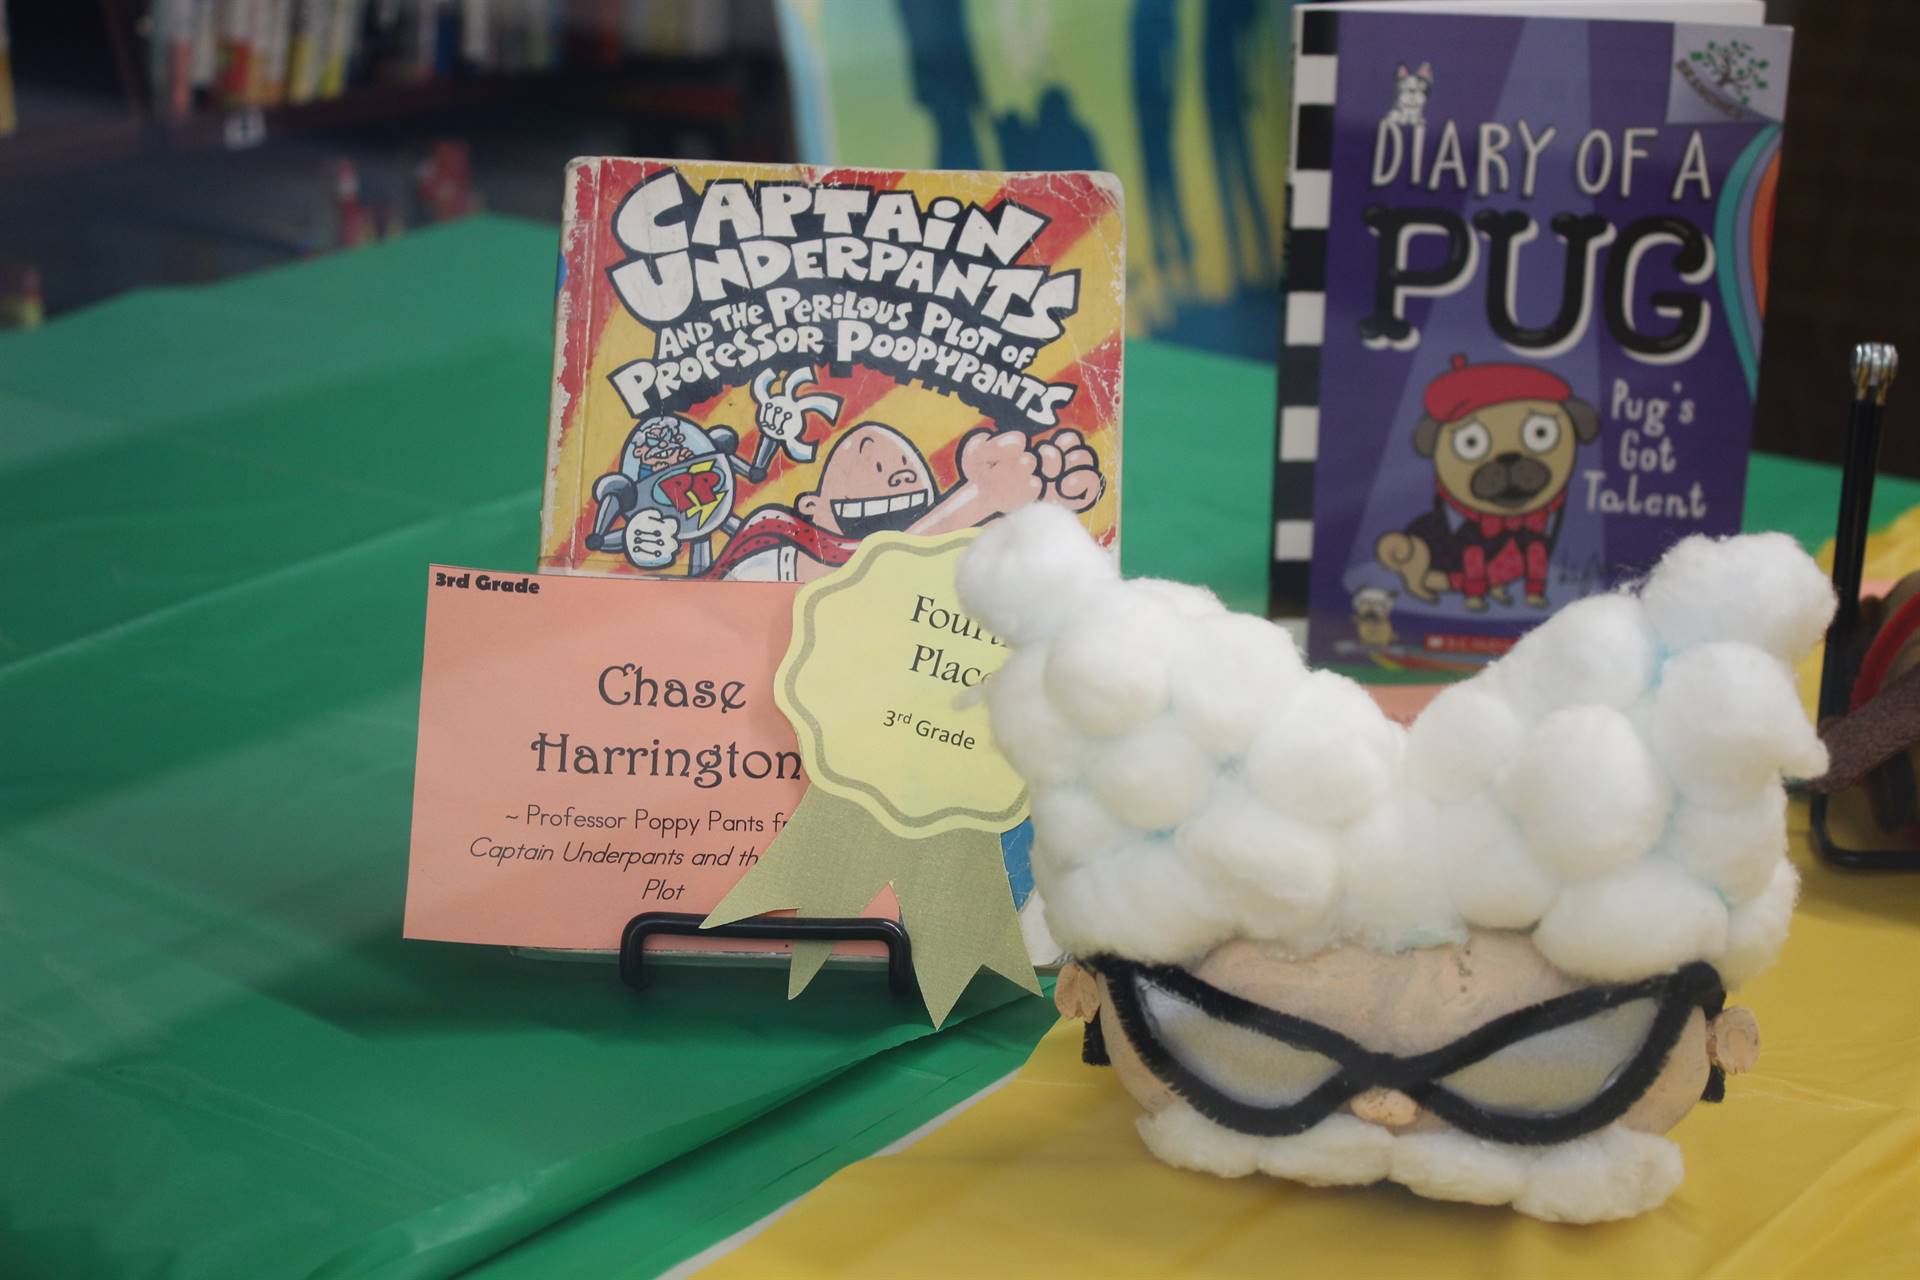 4th Place: Professor Poopy Pants by Chase Harrington